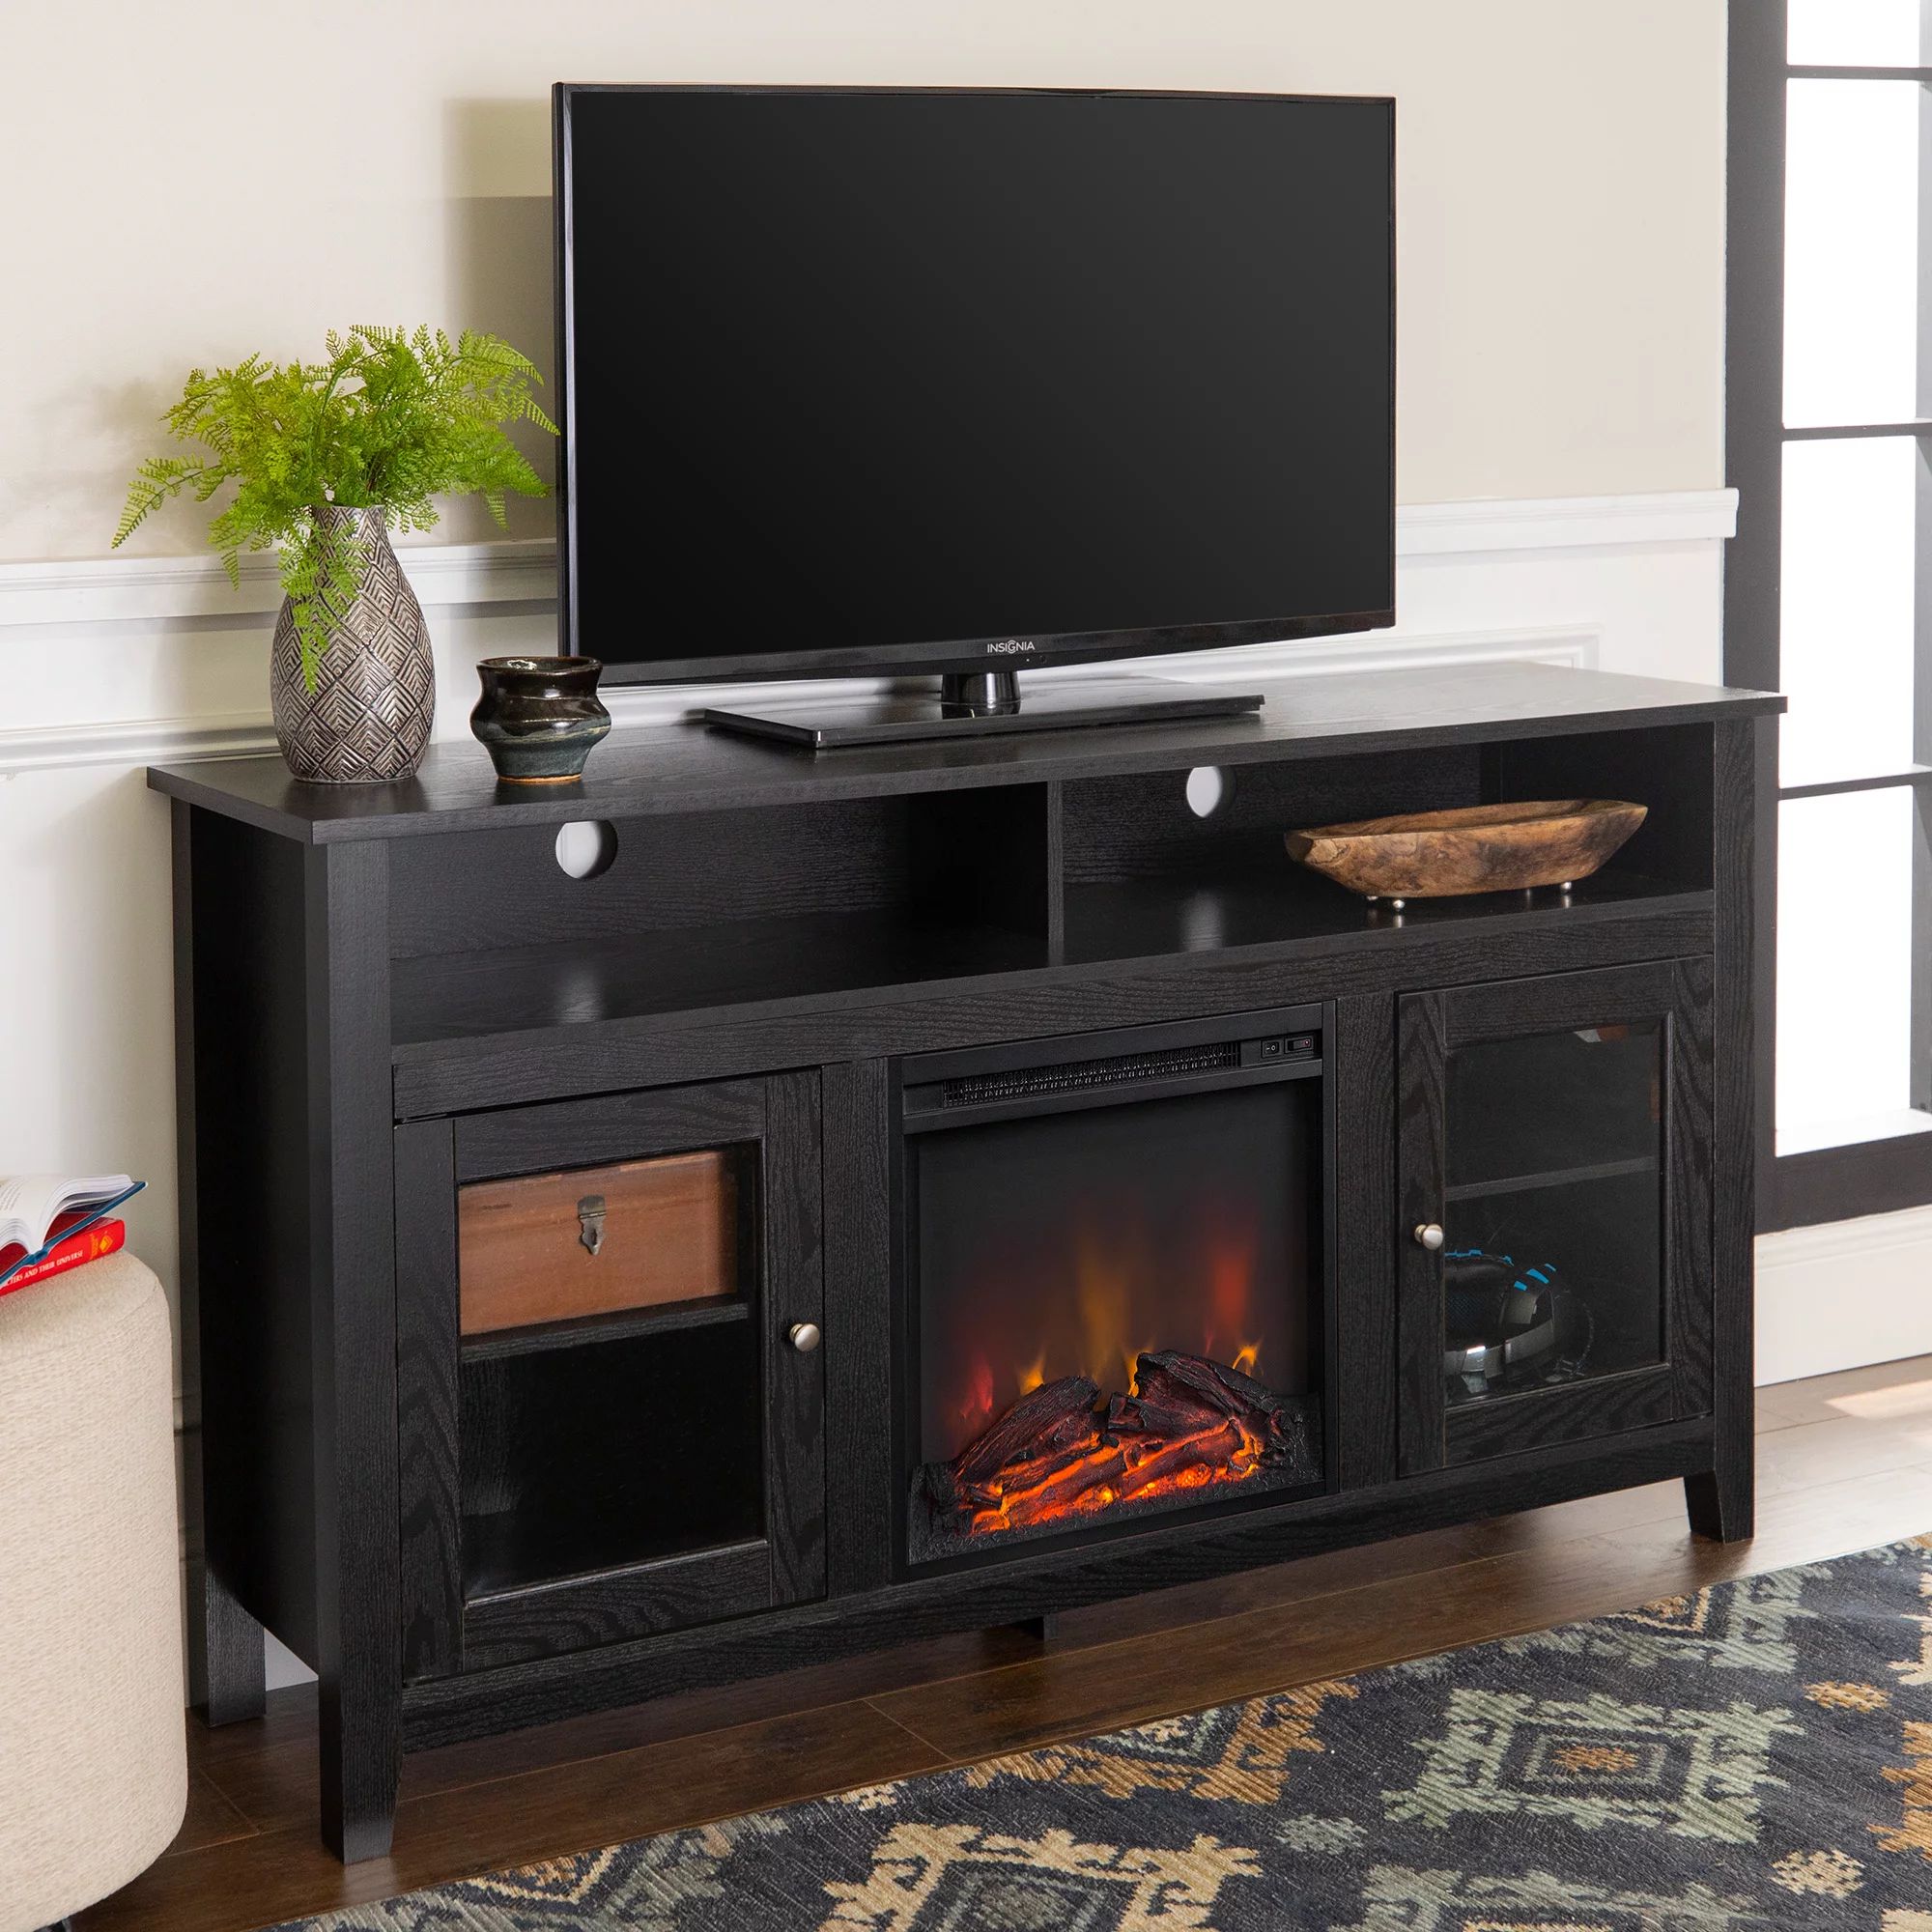 Woven Paths Highboy Glass Door Fireplace TV Stand for TVs up to 65", Black | Walmart (US)